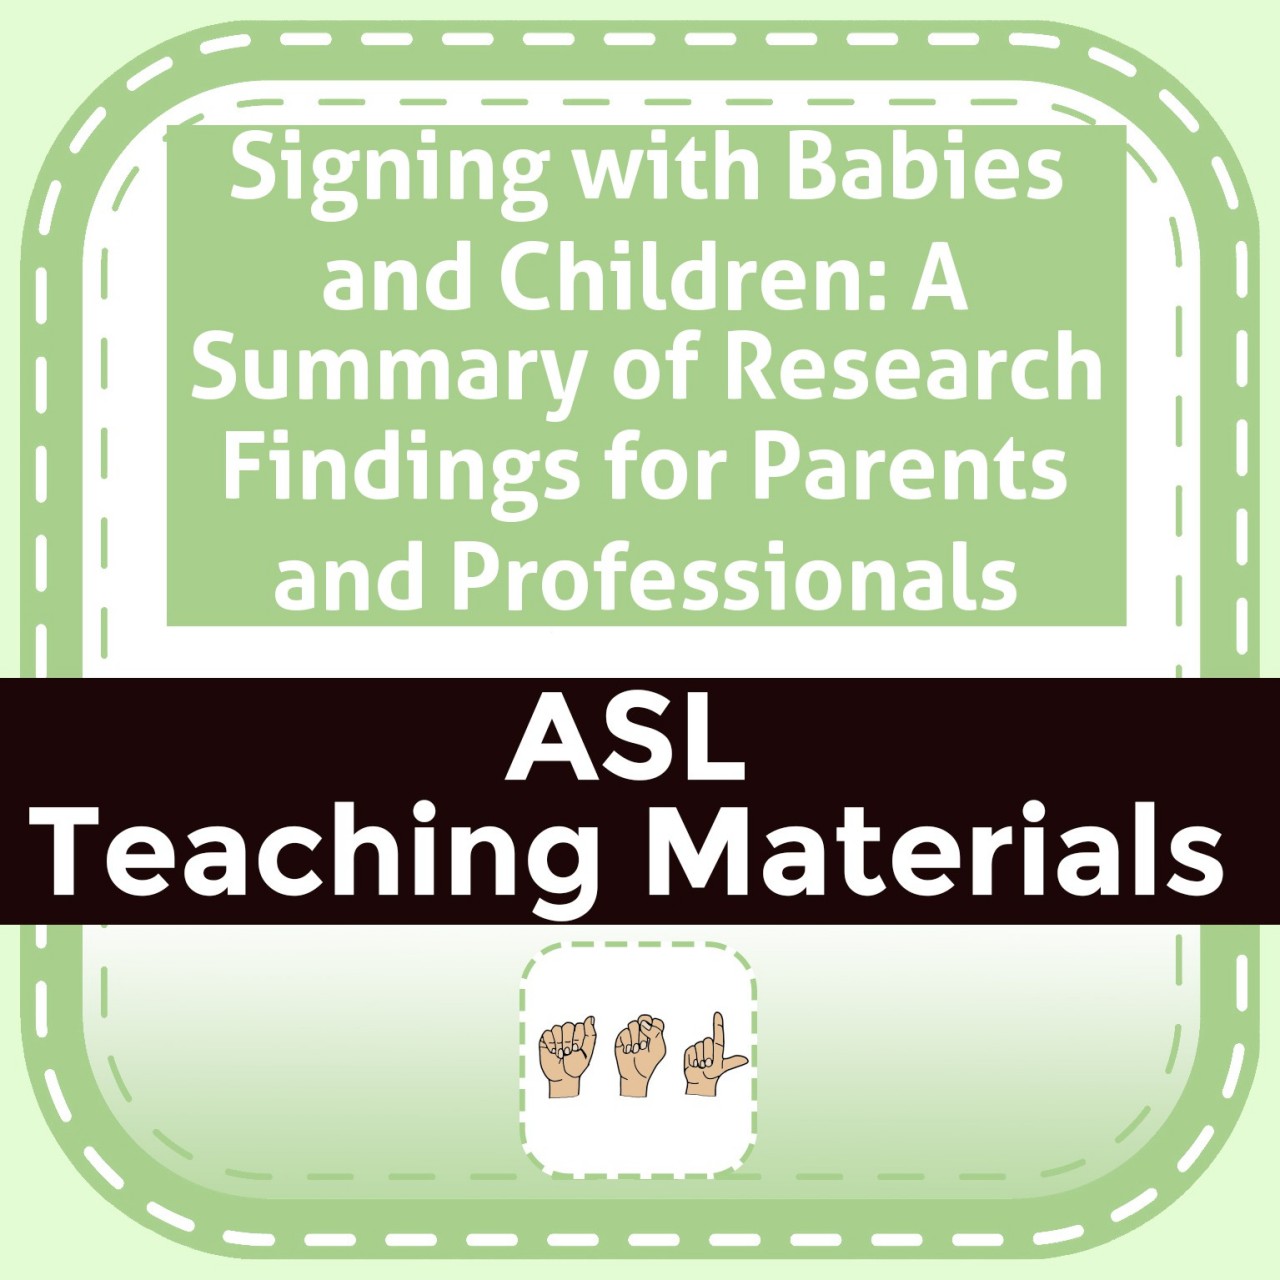 Signing with Babies and Children: A Summary of Research Findings for Parents and Professionals